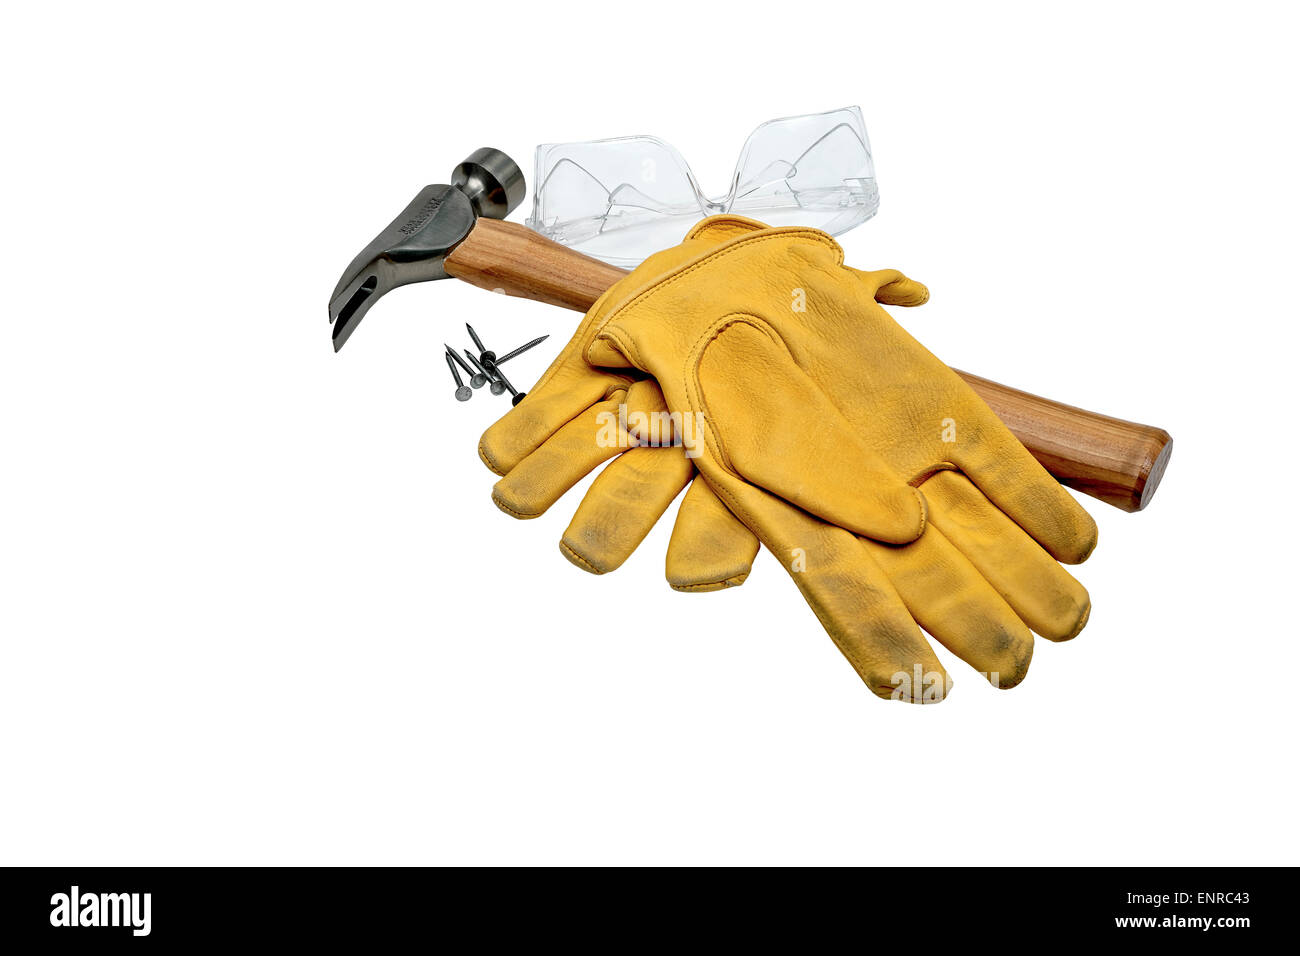 Clear safety goggles with hammer, nails and mustard color used work gloves isolated on white Stock Photo